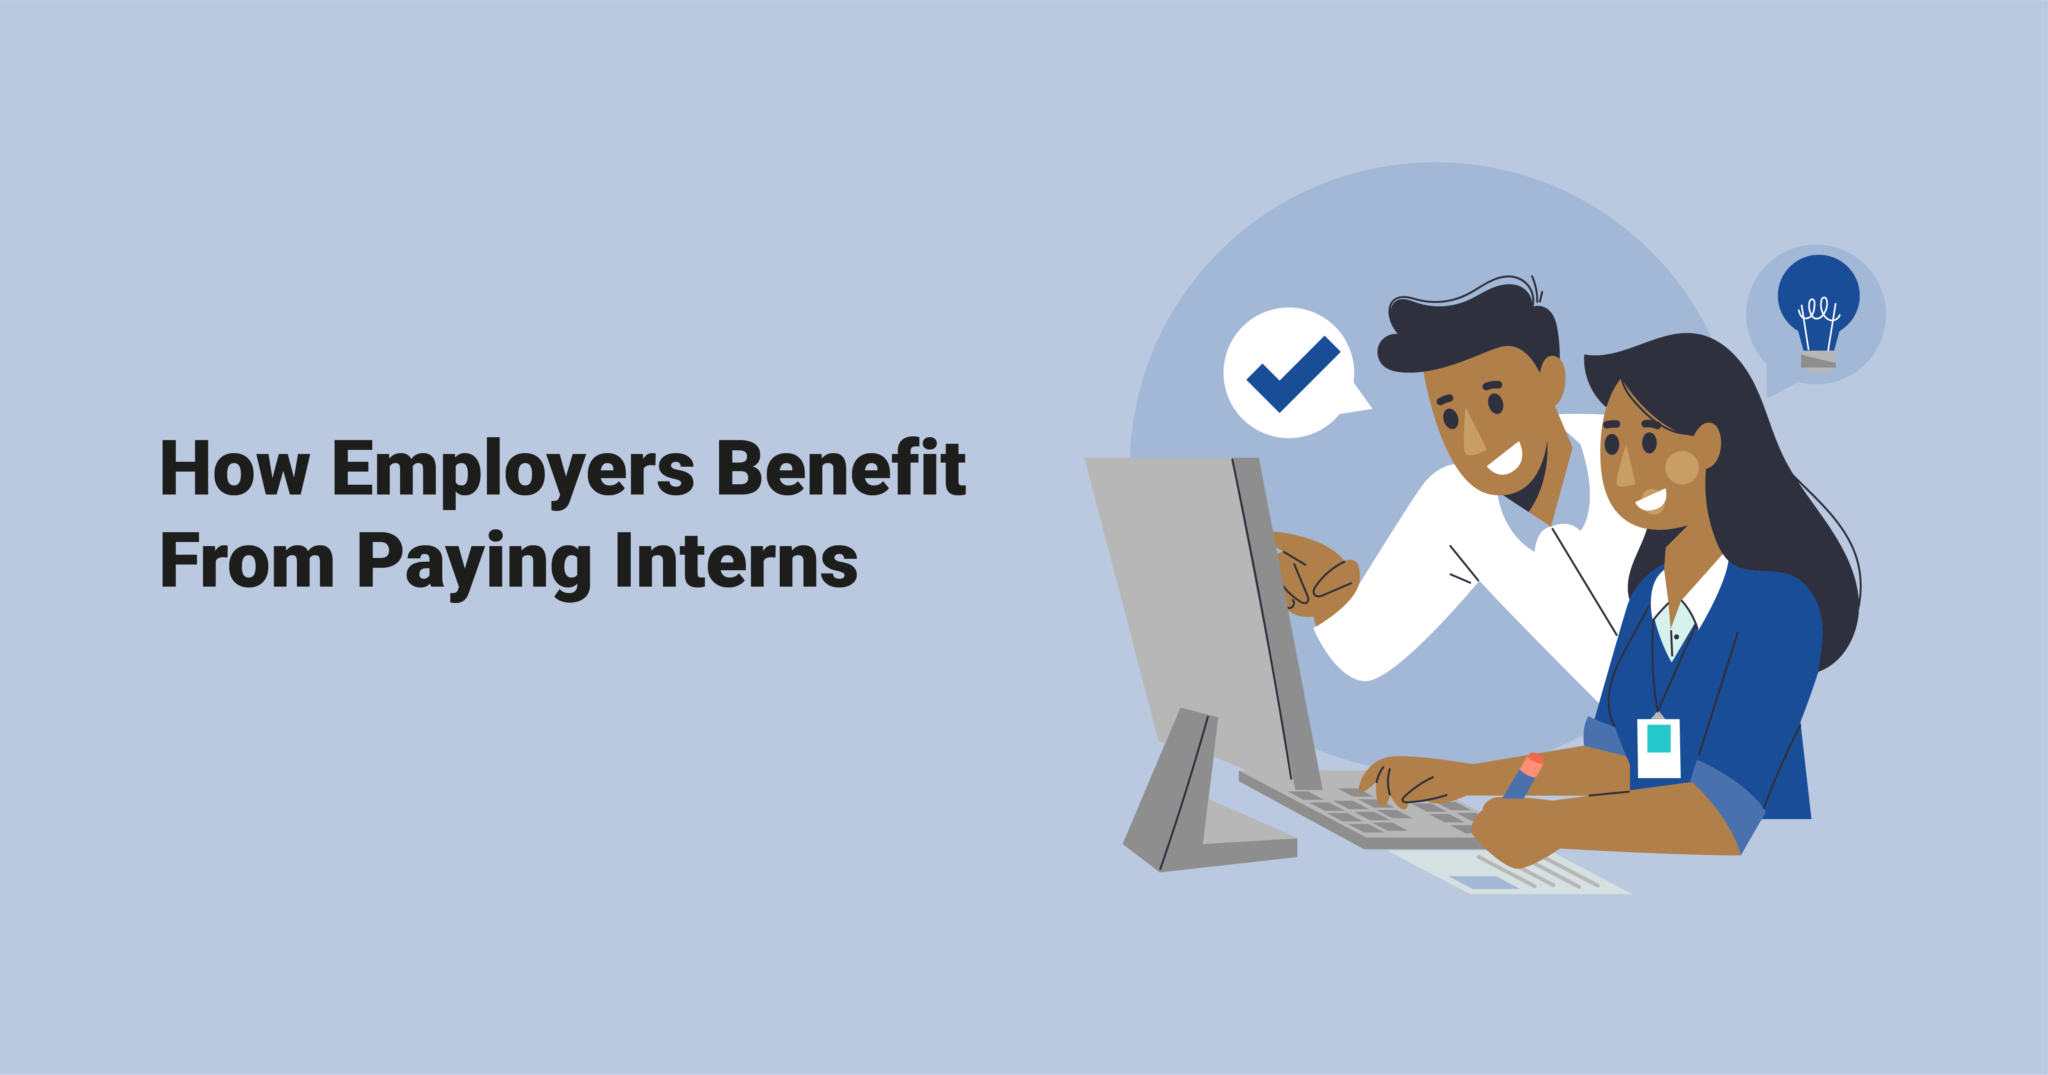 How Employers Benefit From Paying Interns